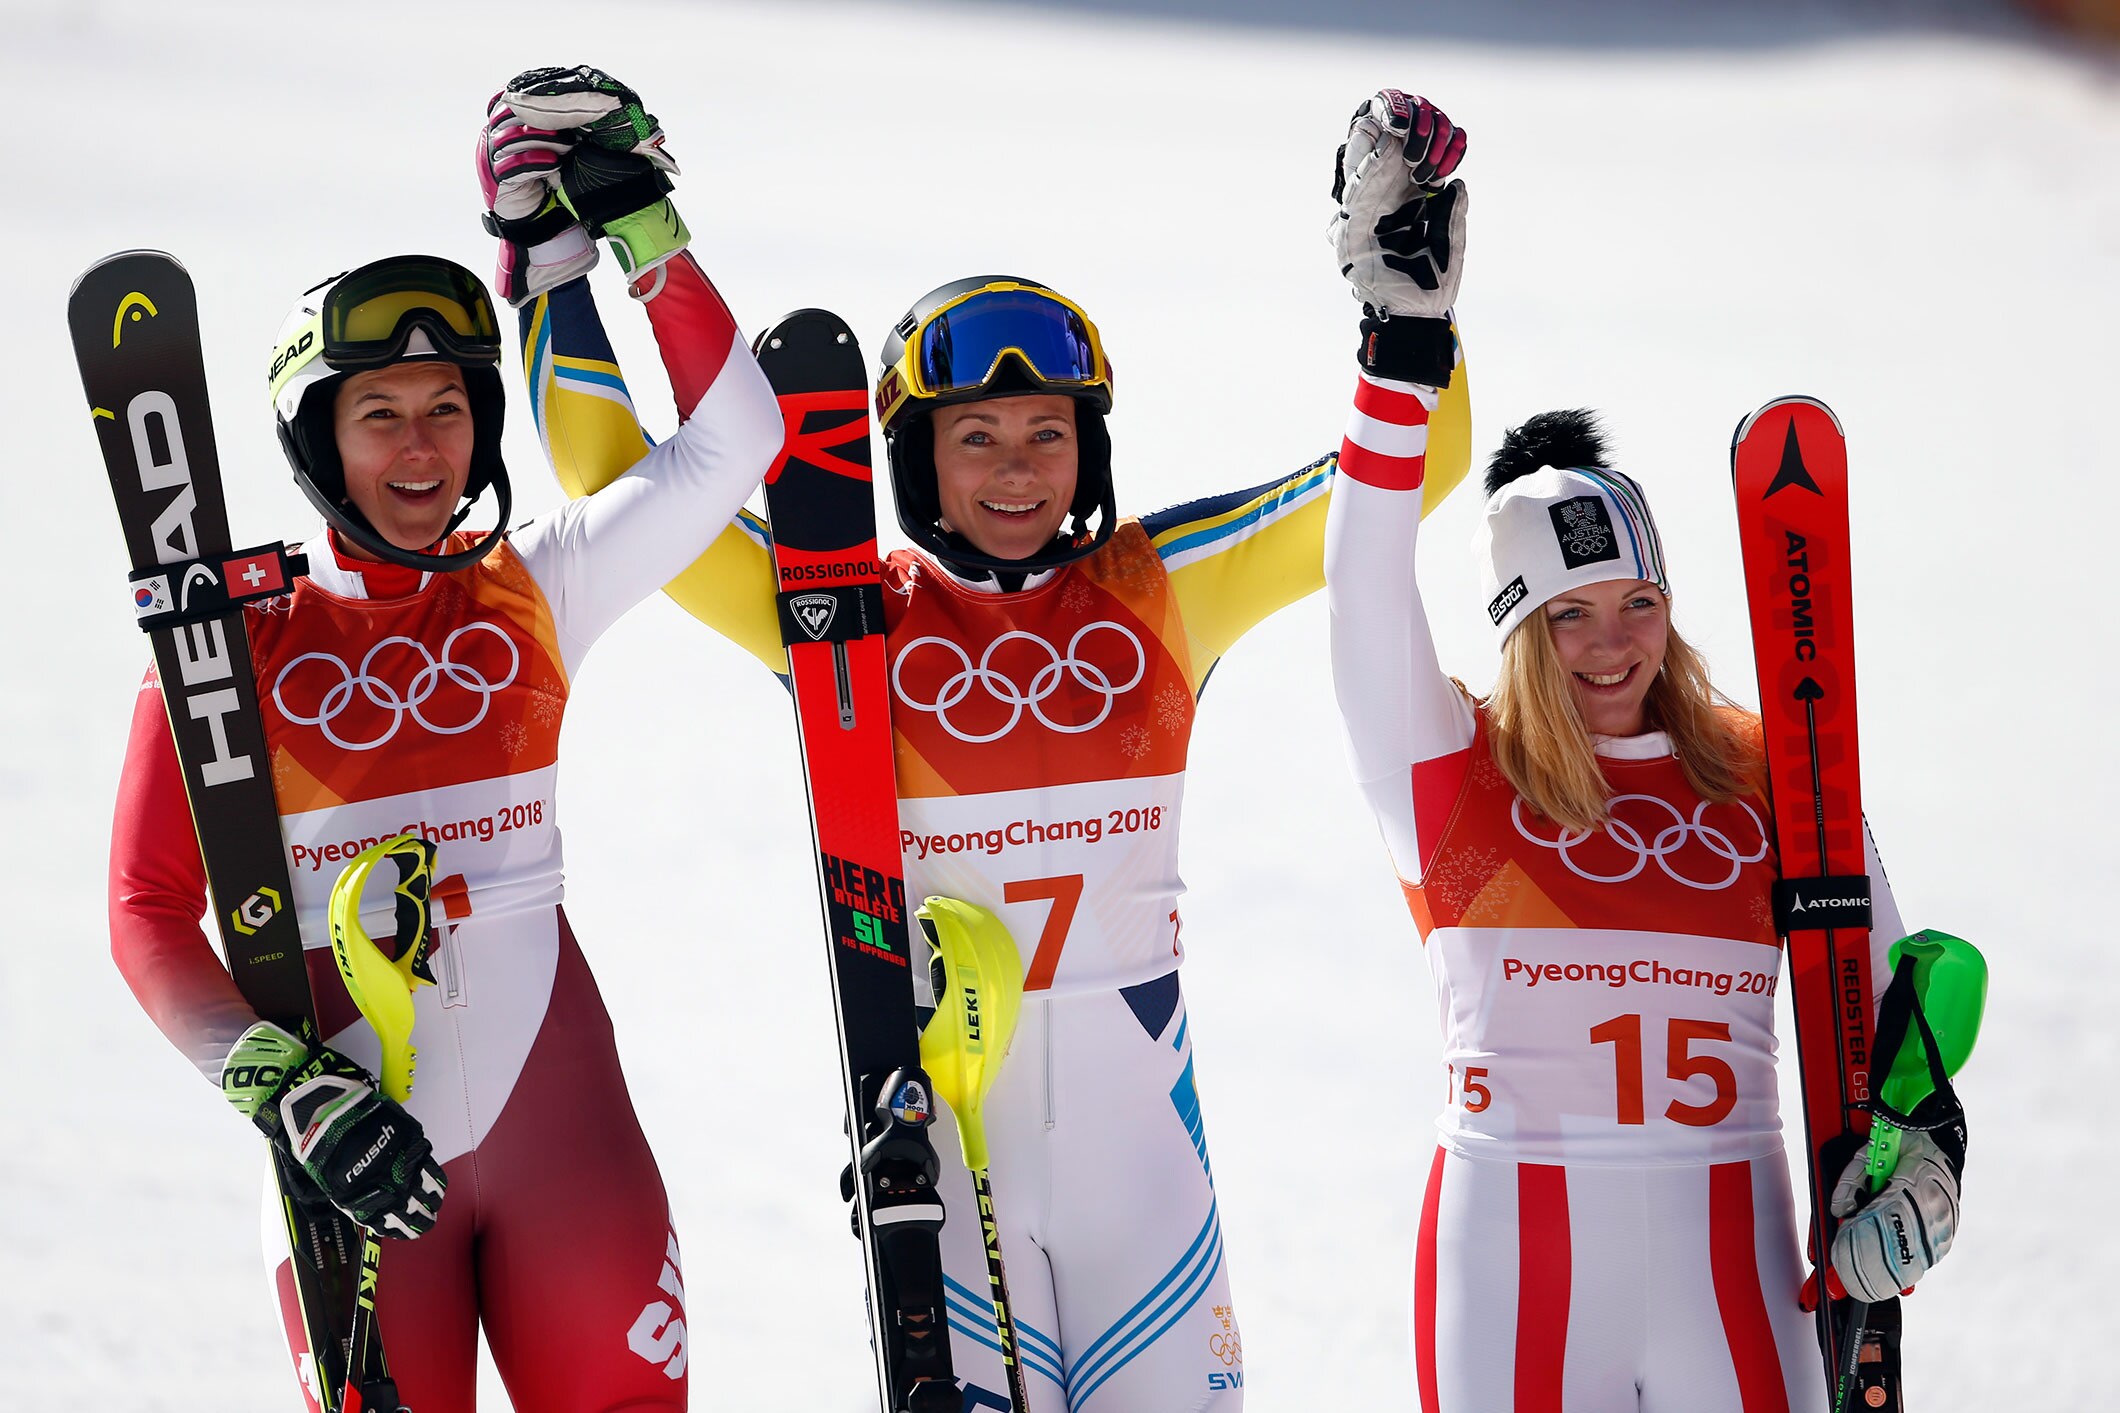 Hansdotter takes her first gold in women’s slalom